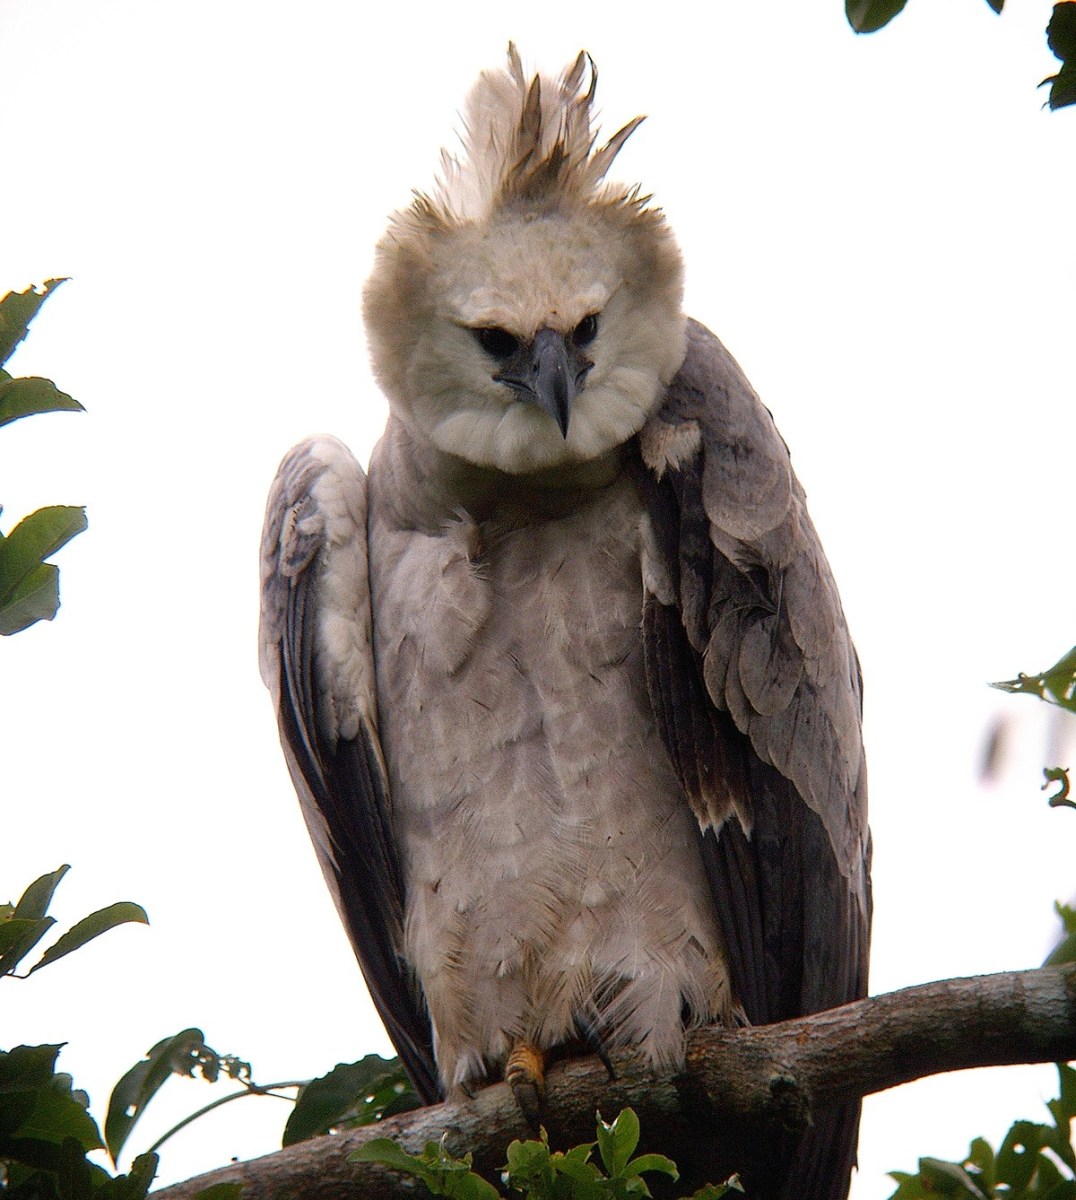 Harpy Eagles are found in the tropical lowland rainforests of Central and South America.